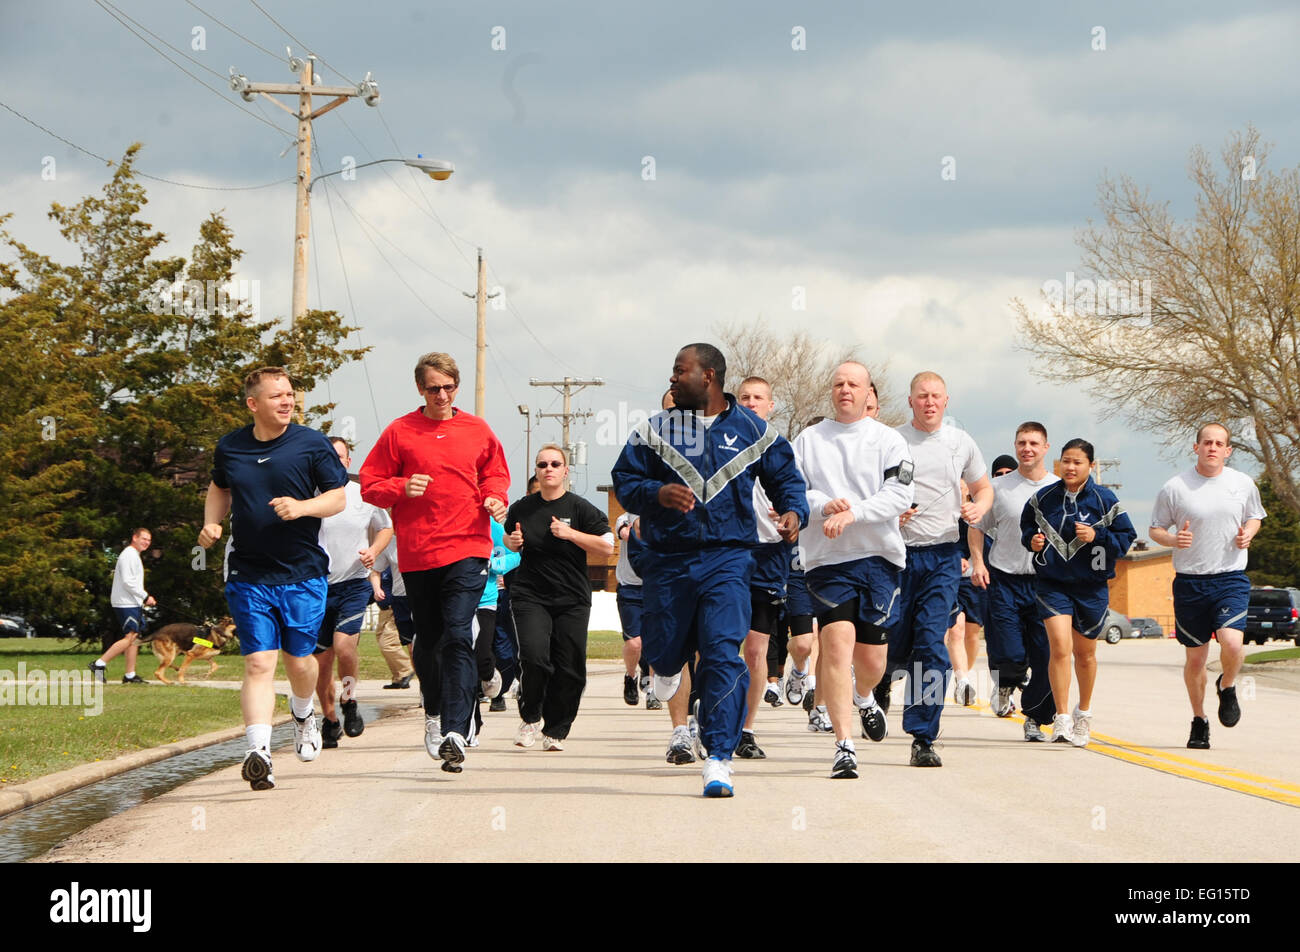 ELLSWORTH AIR FORCE BASE, S.D. -- Airmen from across the base compete in a 5K run during National Police Week, May 13.  The 5K run started at the Bellamy Fitness Center, looped around the 28th Security Forces Squadron firing range and back.  Airman 1st Class Anthony Sanchelli Stock Photo